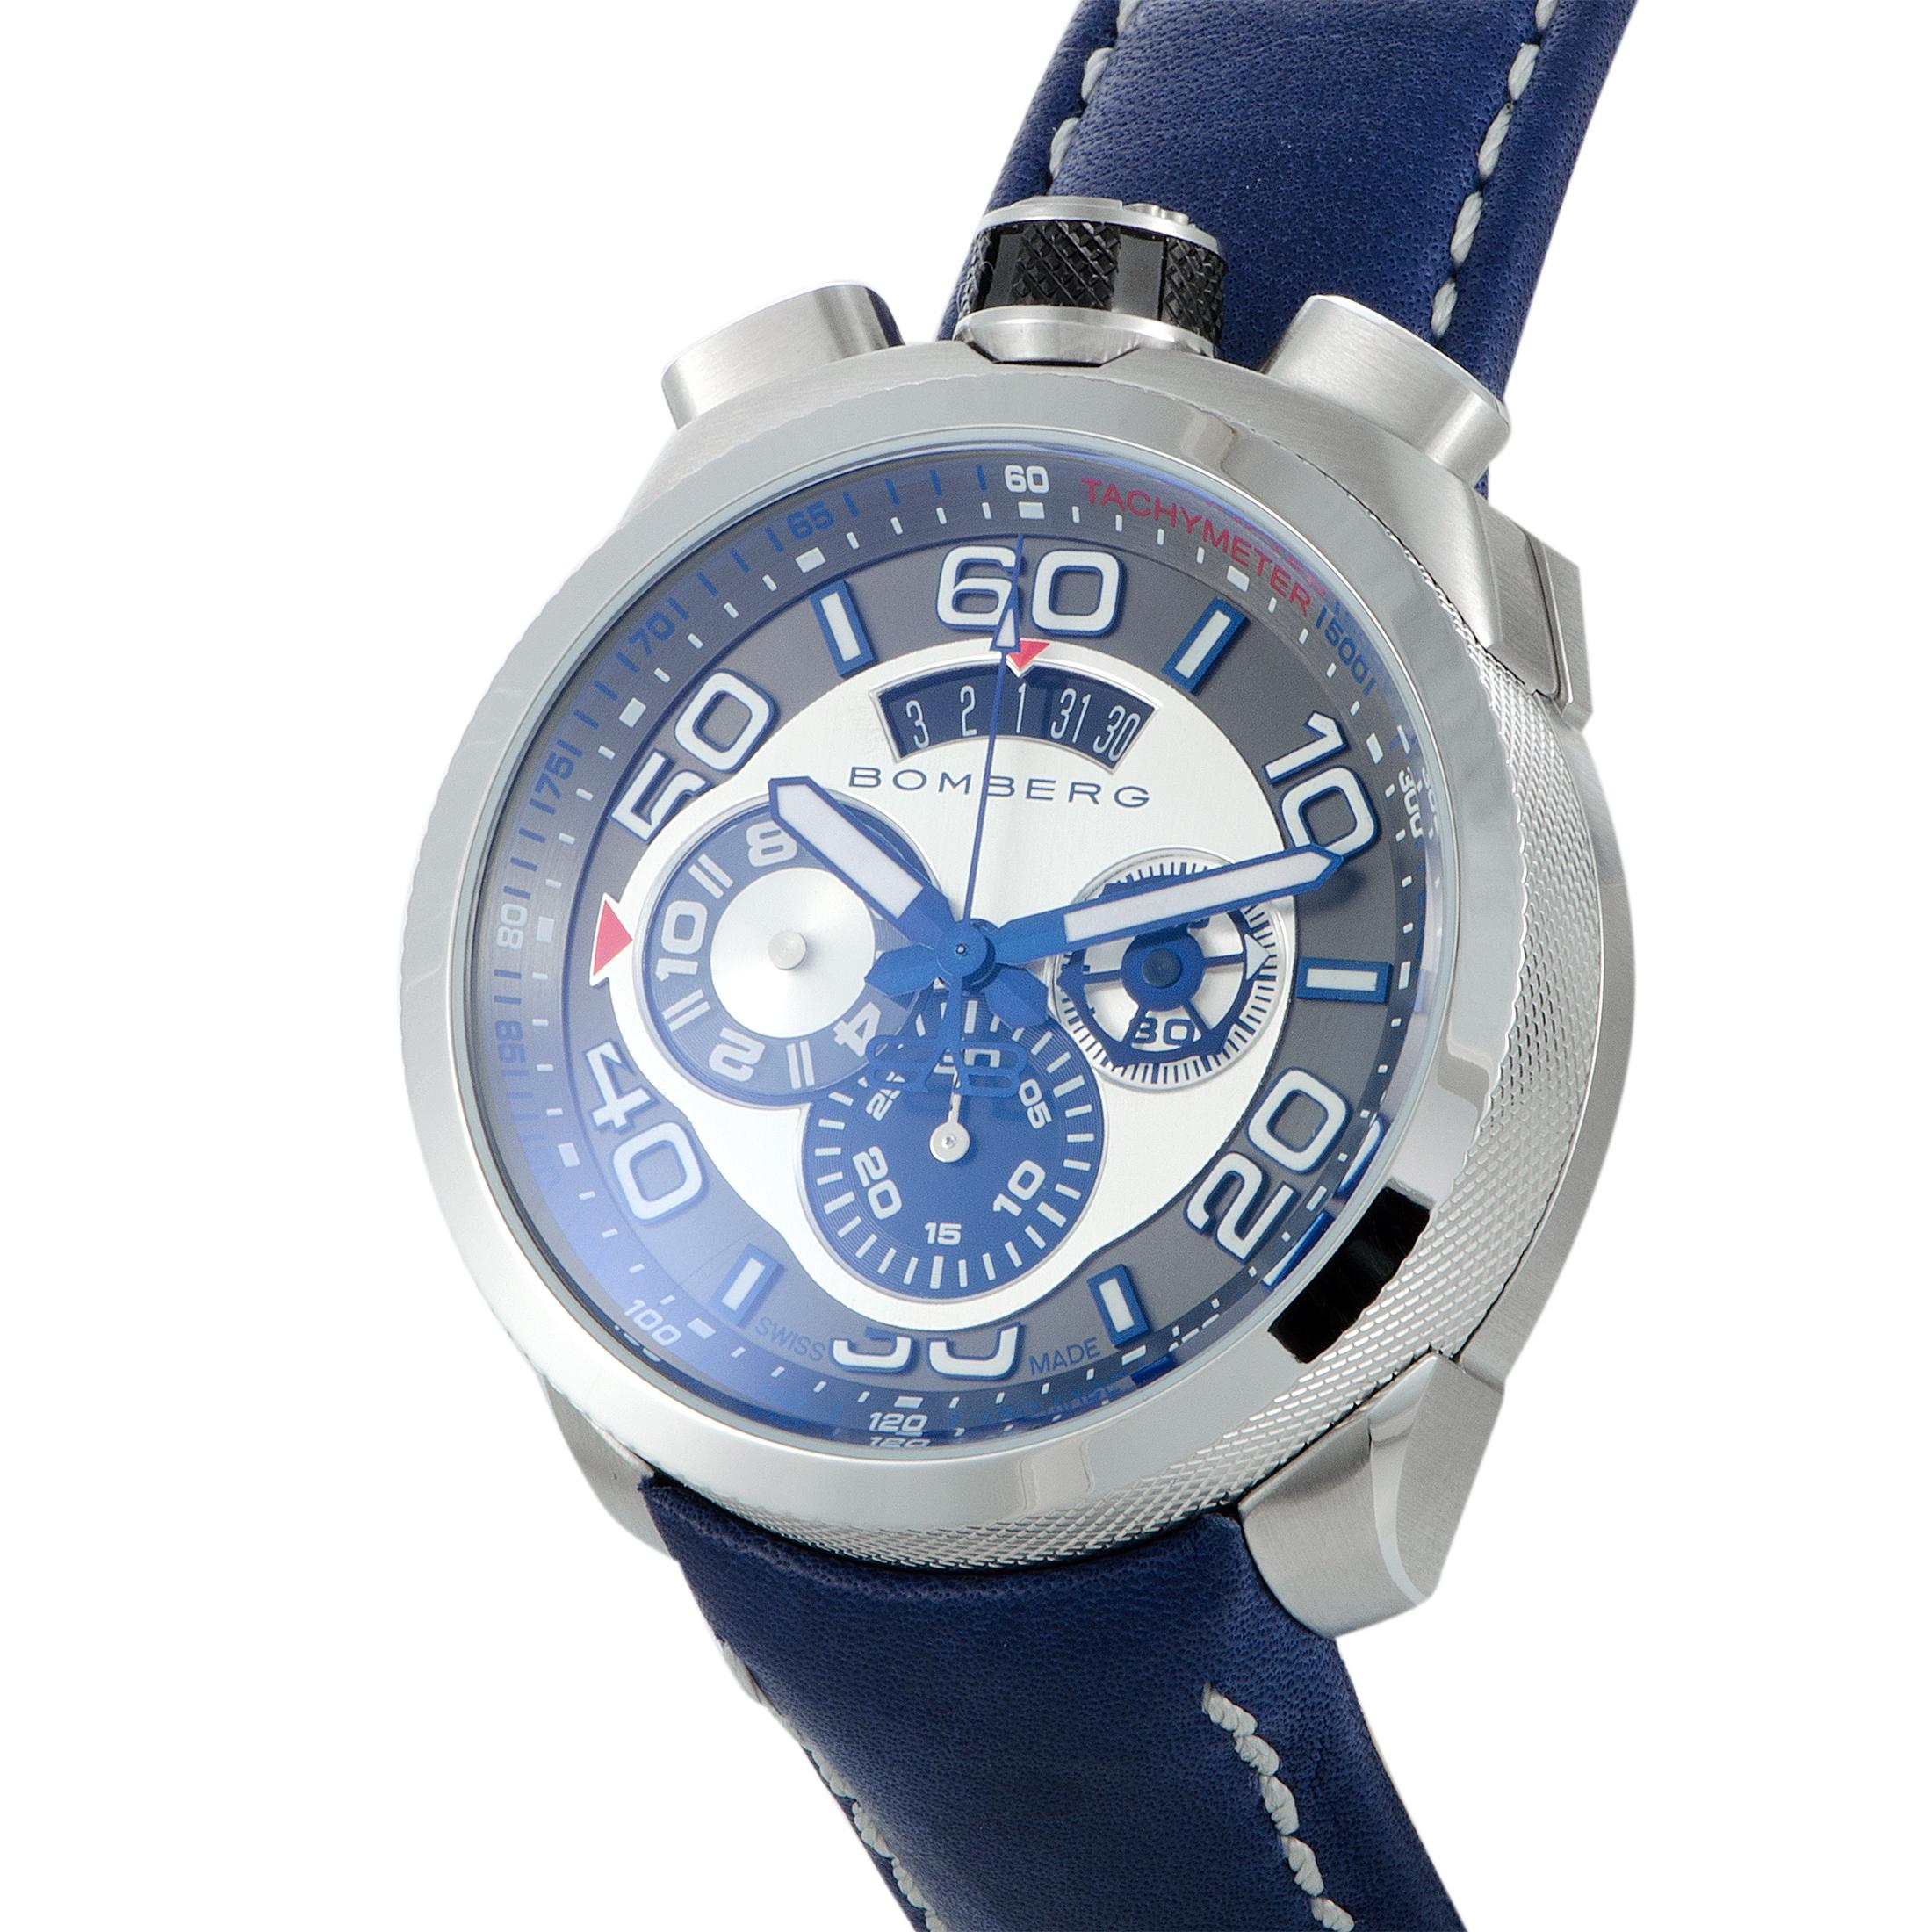 This is the Bomberg Bolt-68, reference number BS45CHSS.007.3.

It is presented with a 45 mm stainless steel case that is mounted onto a blue leather strap fitted with a tang buckle, but can also be worn on a chain. The watch is powered by a quartz